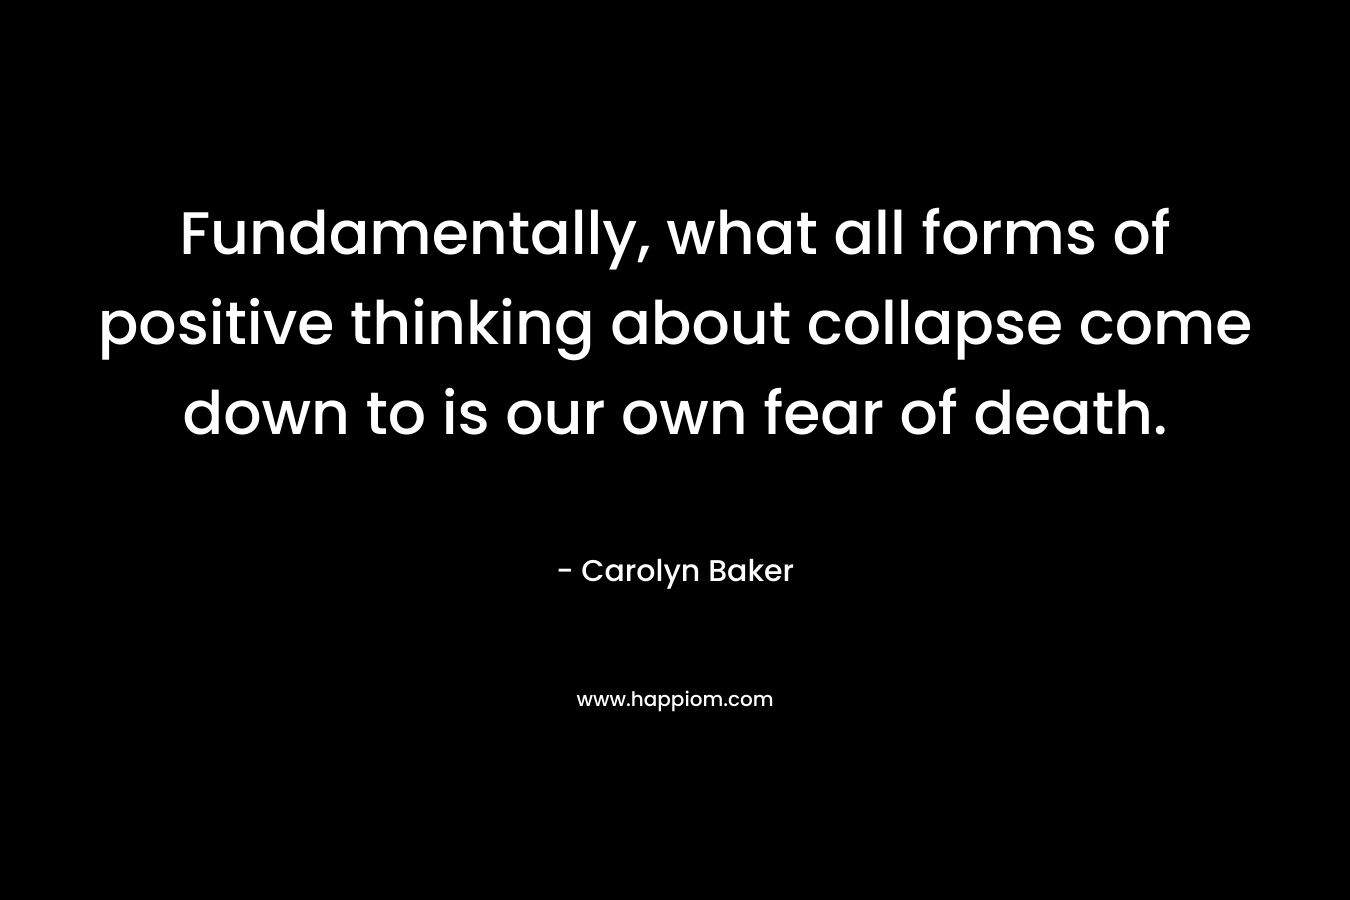 Fundamentally, what all forms of positive thinking about collapse come down to is our own fear of death. – Carolyn Baker